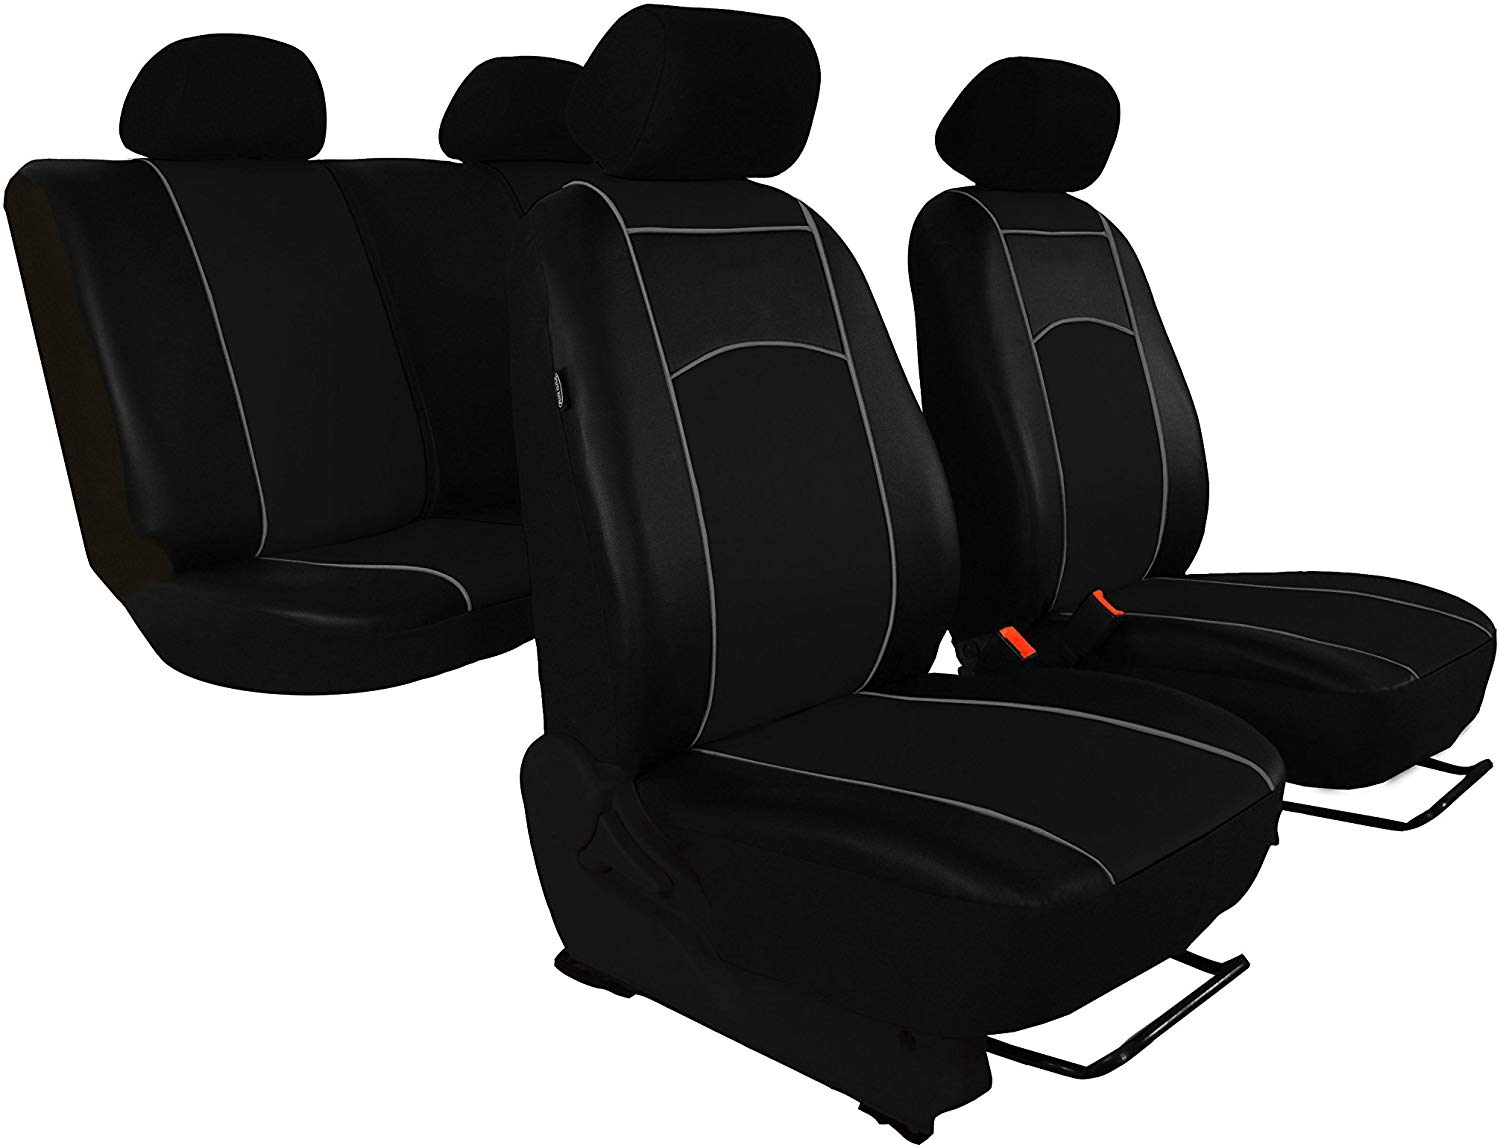 Exclusive Custom Eco Leather Seat Covers 7 Colors Vauxhall Corsa E.